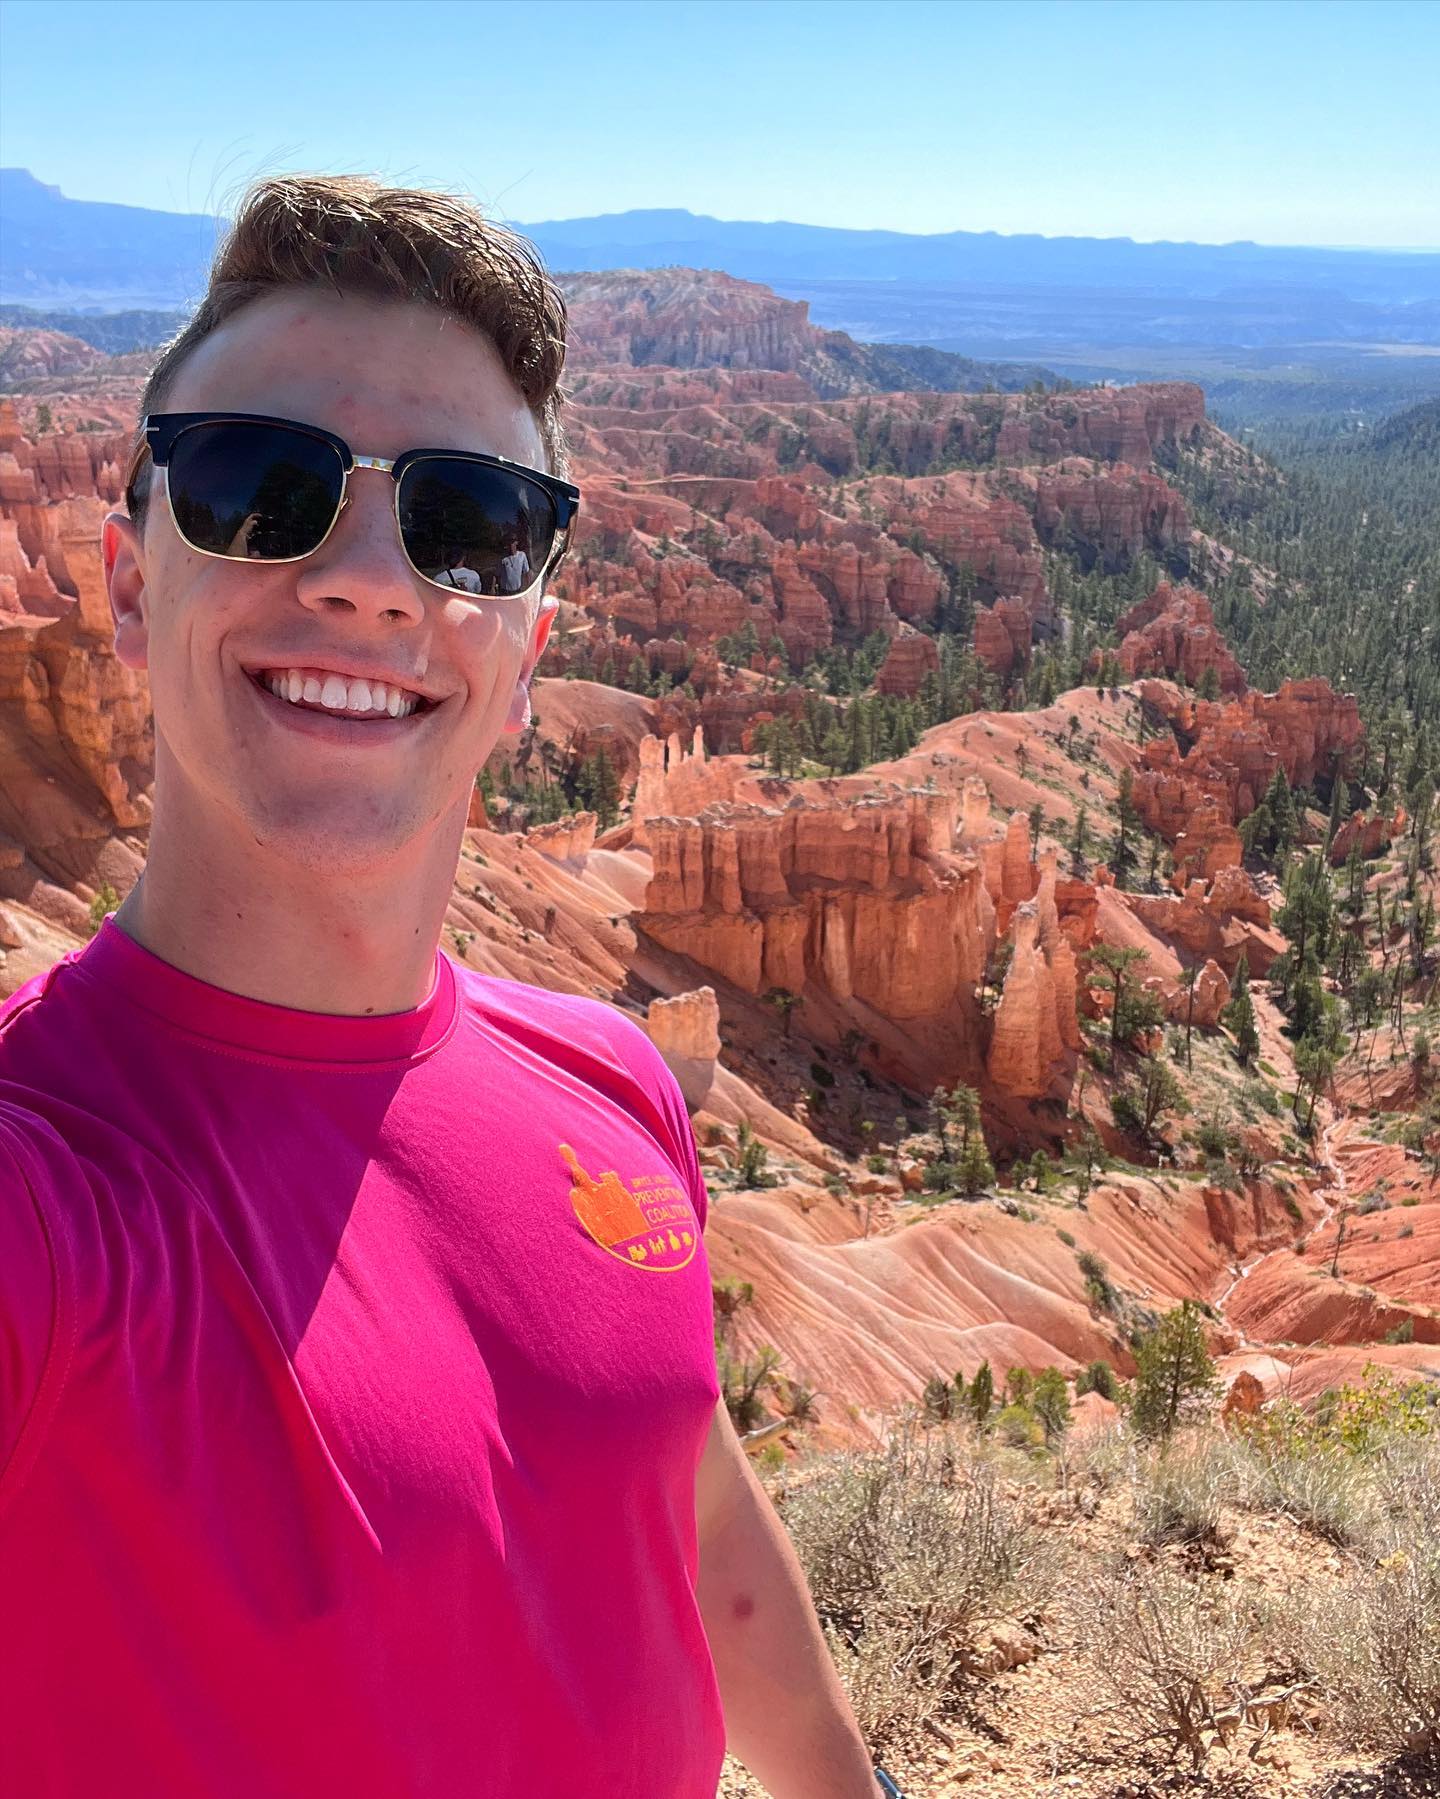 The gaggle of gays takes on Panguitch and had the best time! Such a fun summer adventure! 🫶🏻❤️

#friends #utah #panguitch #bryce #brycecanyon #gay #gays #gaymen #gaymuscle #gaypride #gayfriends #gaggle #gaggleofgays #gayfitness #gayman